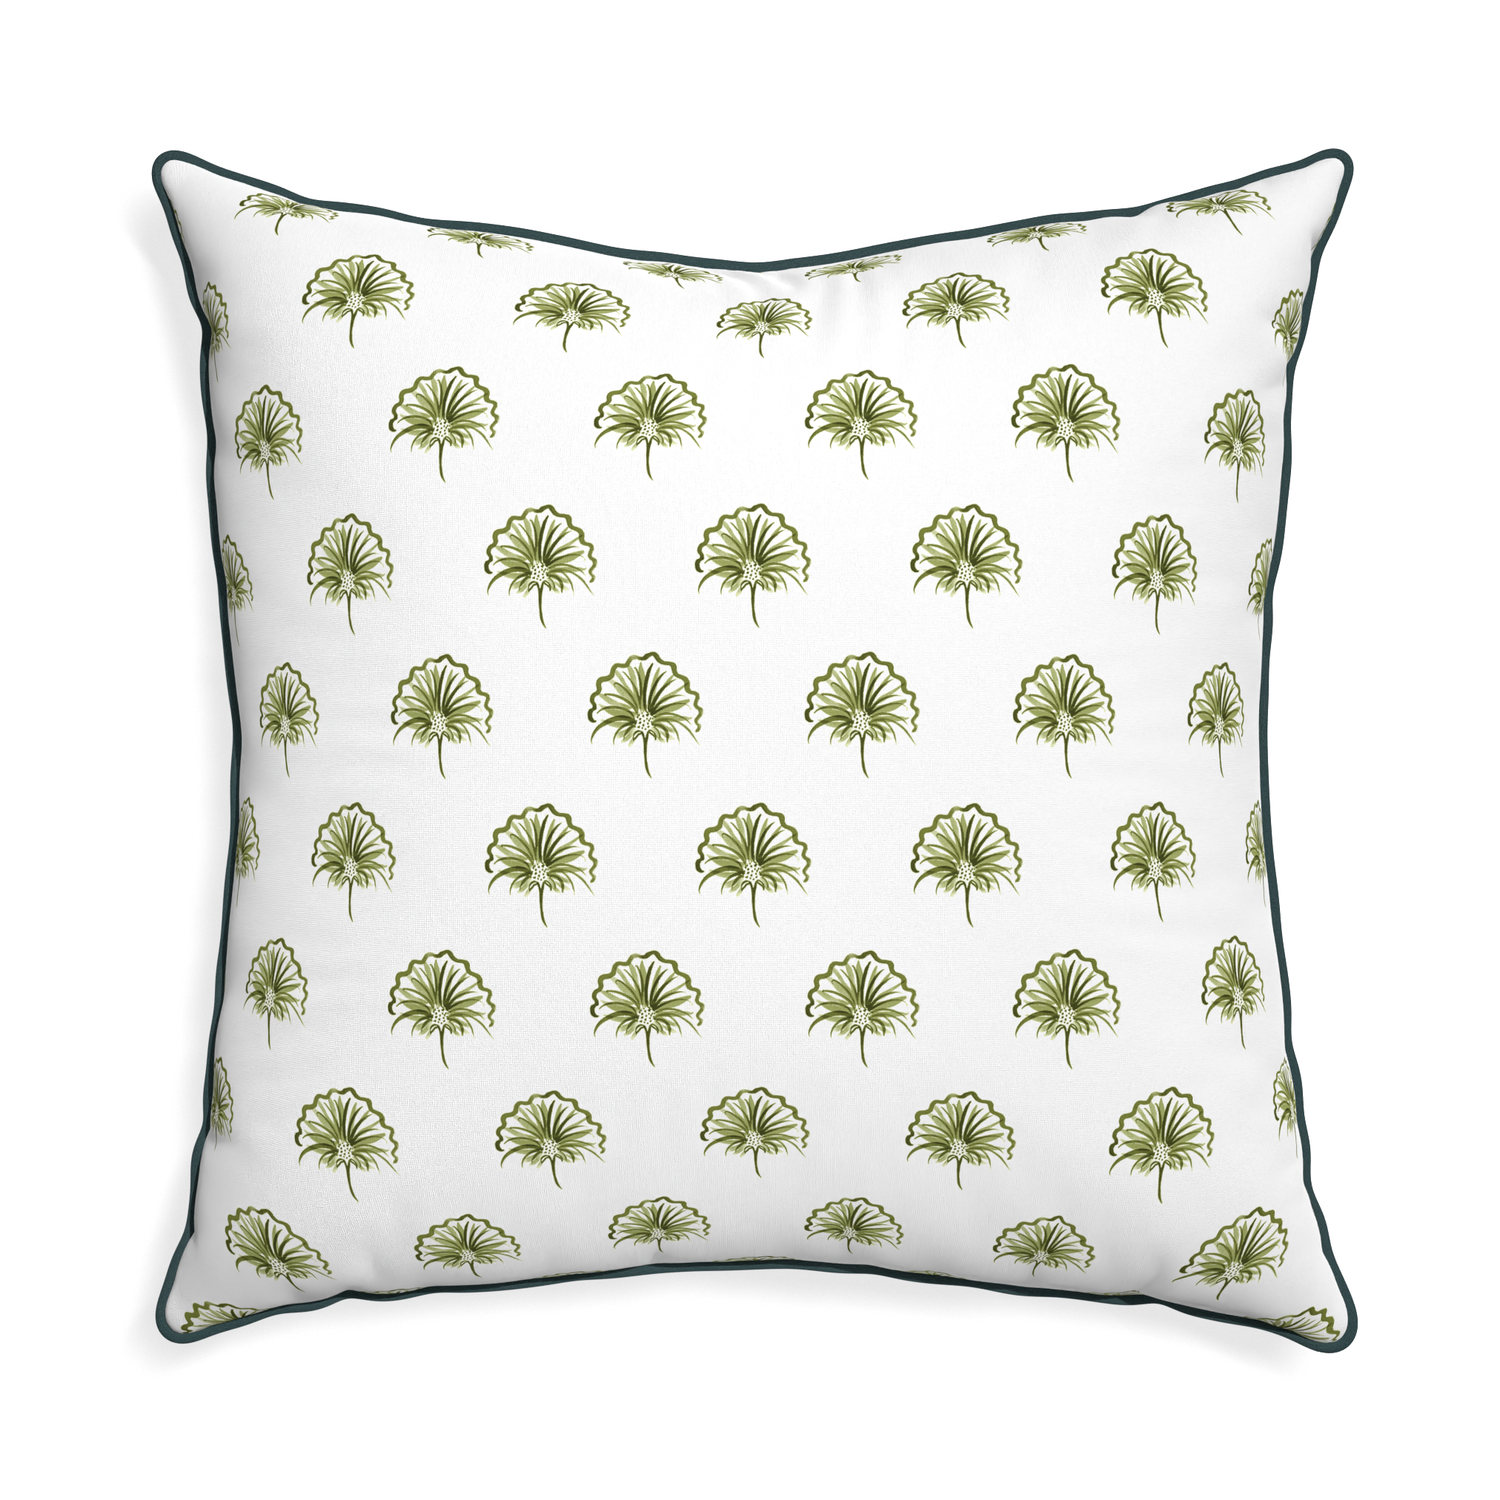 Euro-sham penelope moss custom green floralpillow with p piping on white background